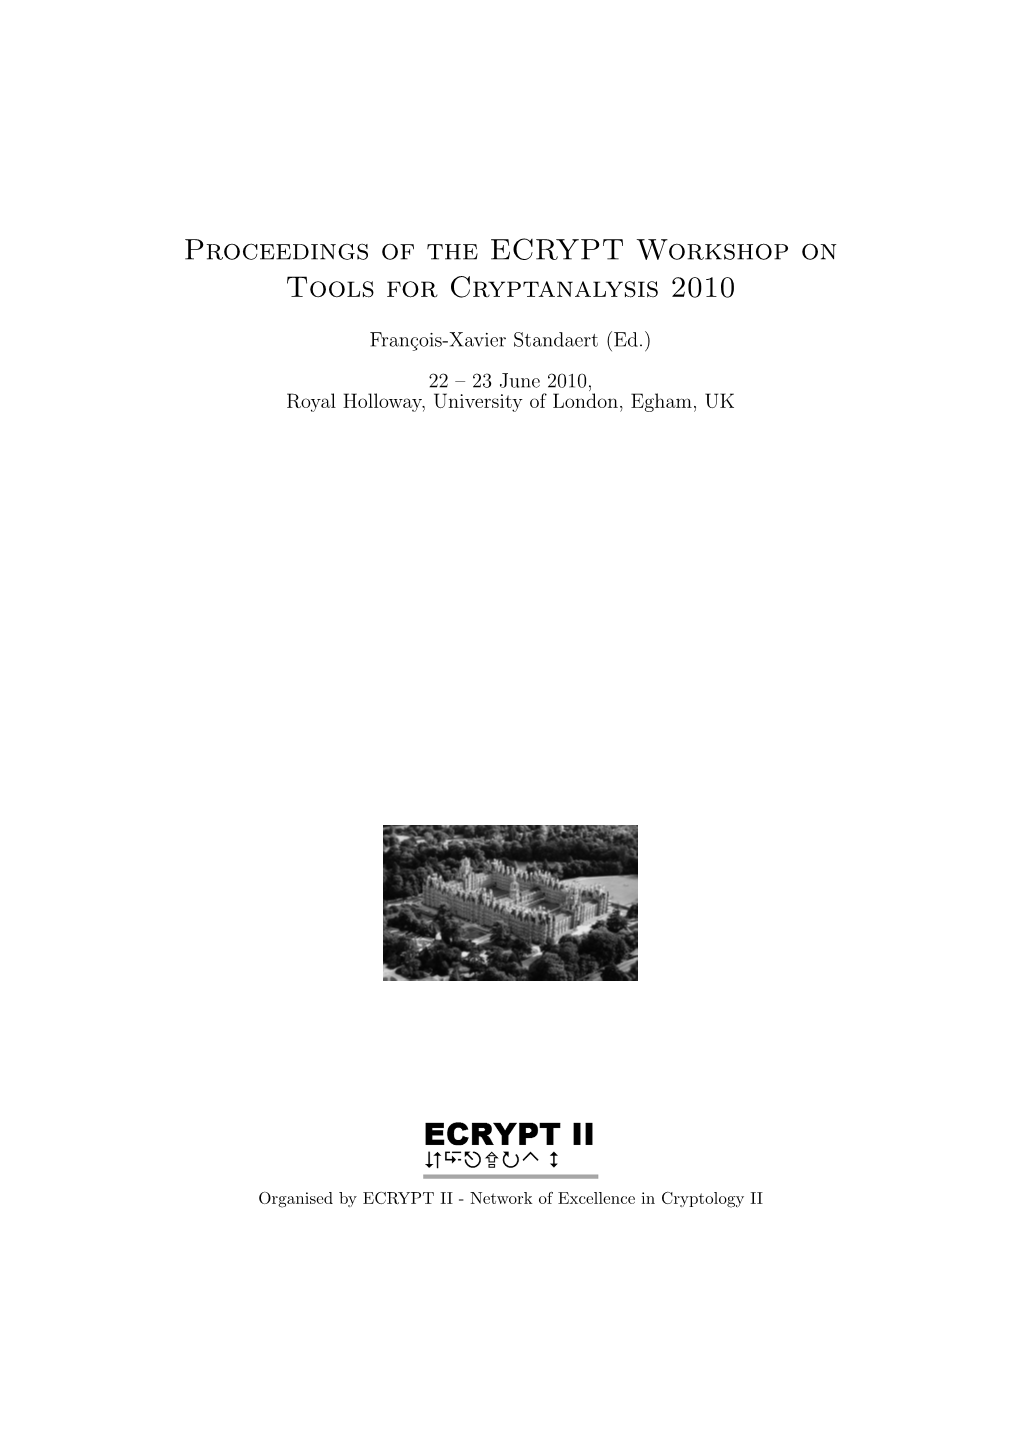 Proceedings of the ECRYPT Workshop on Tools for Cryptanalysis 2010